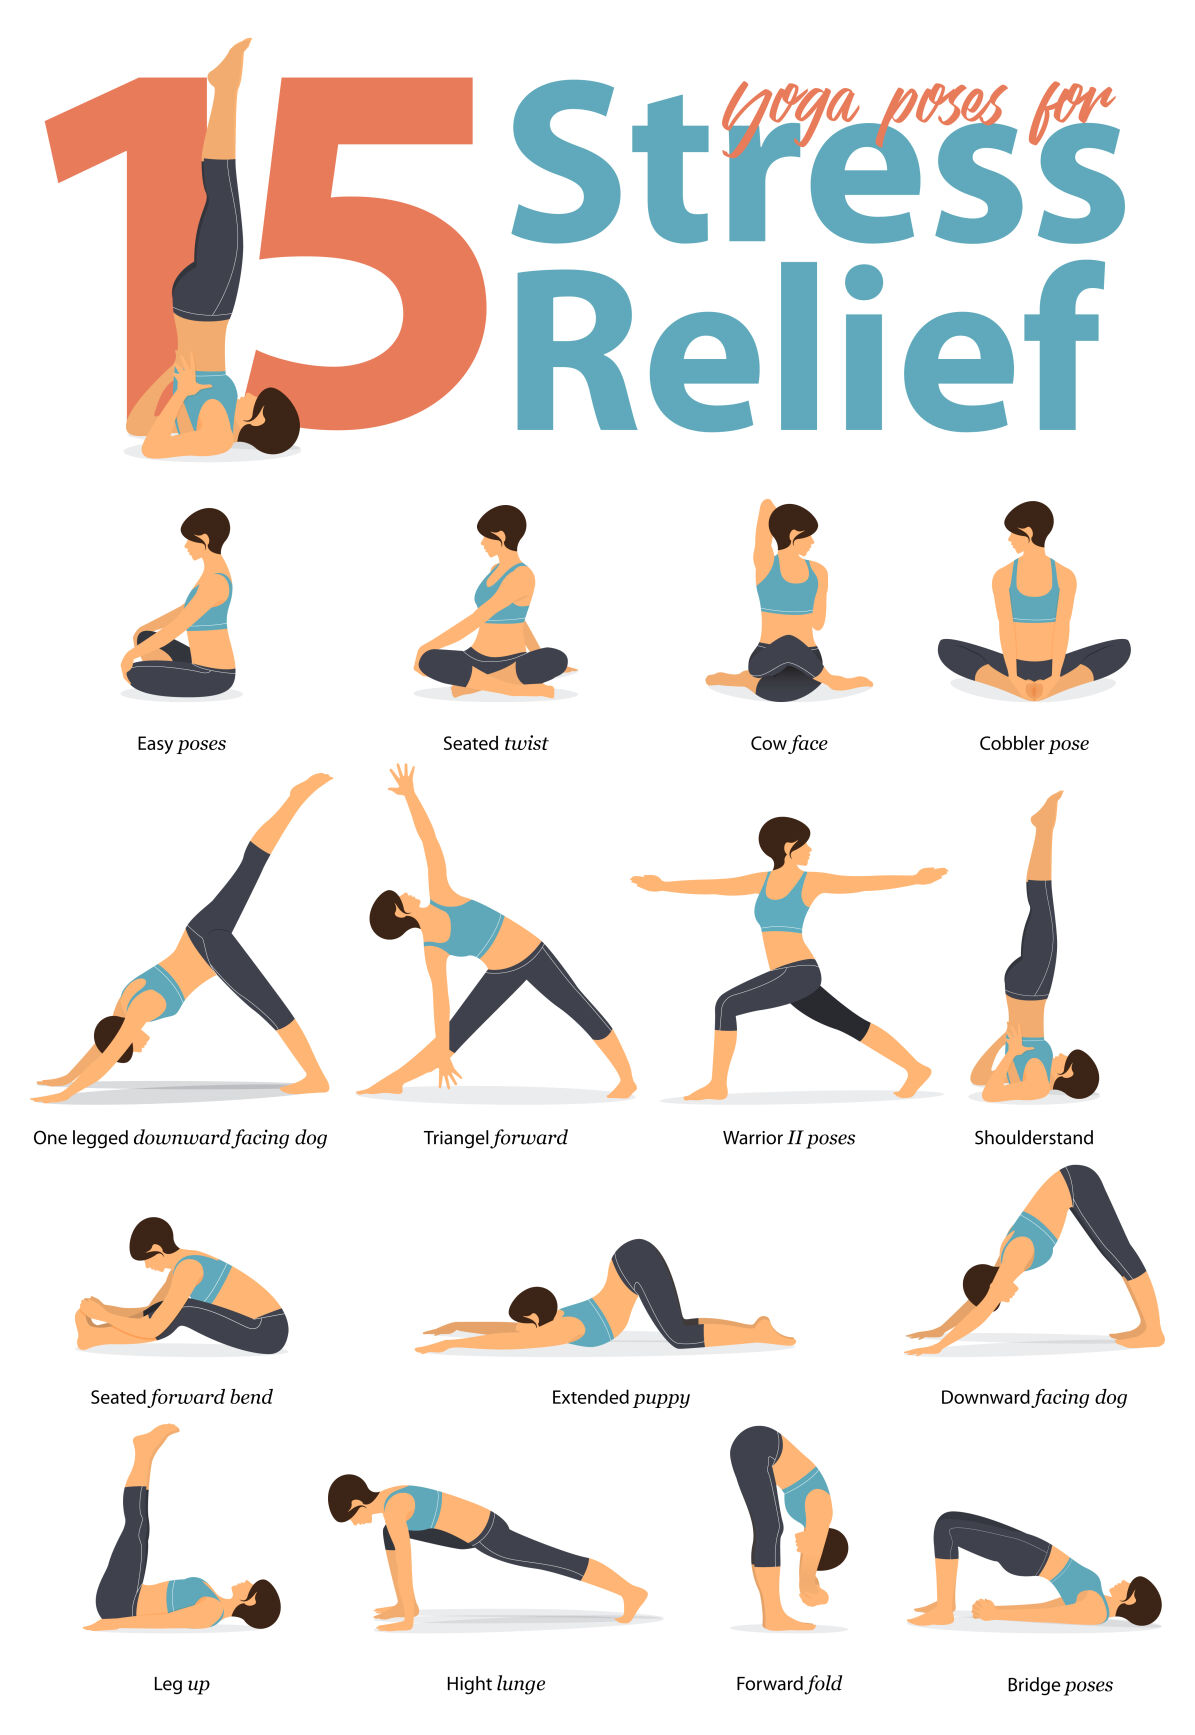 4 yoga poses for stress relief | Smart Tips